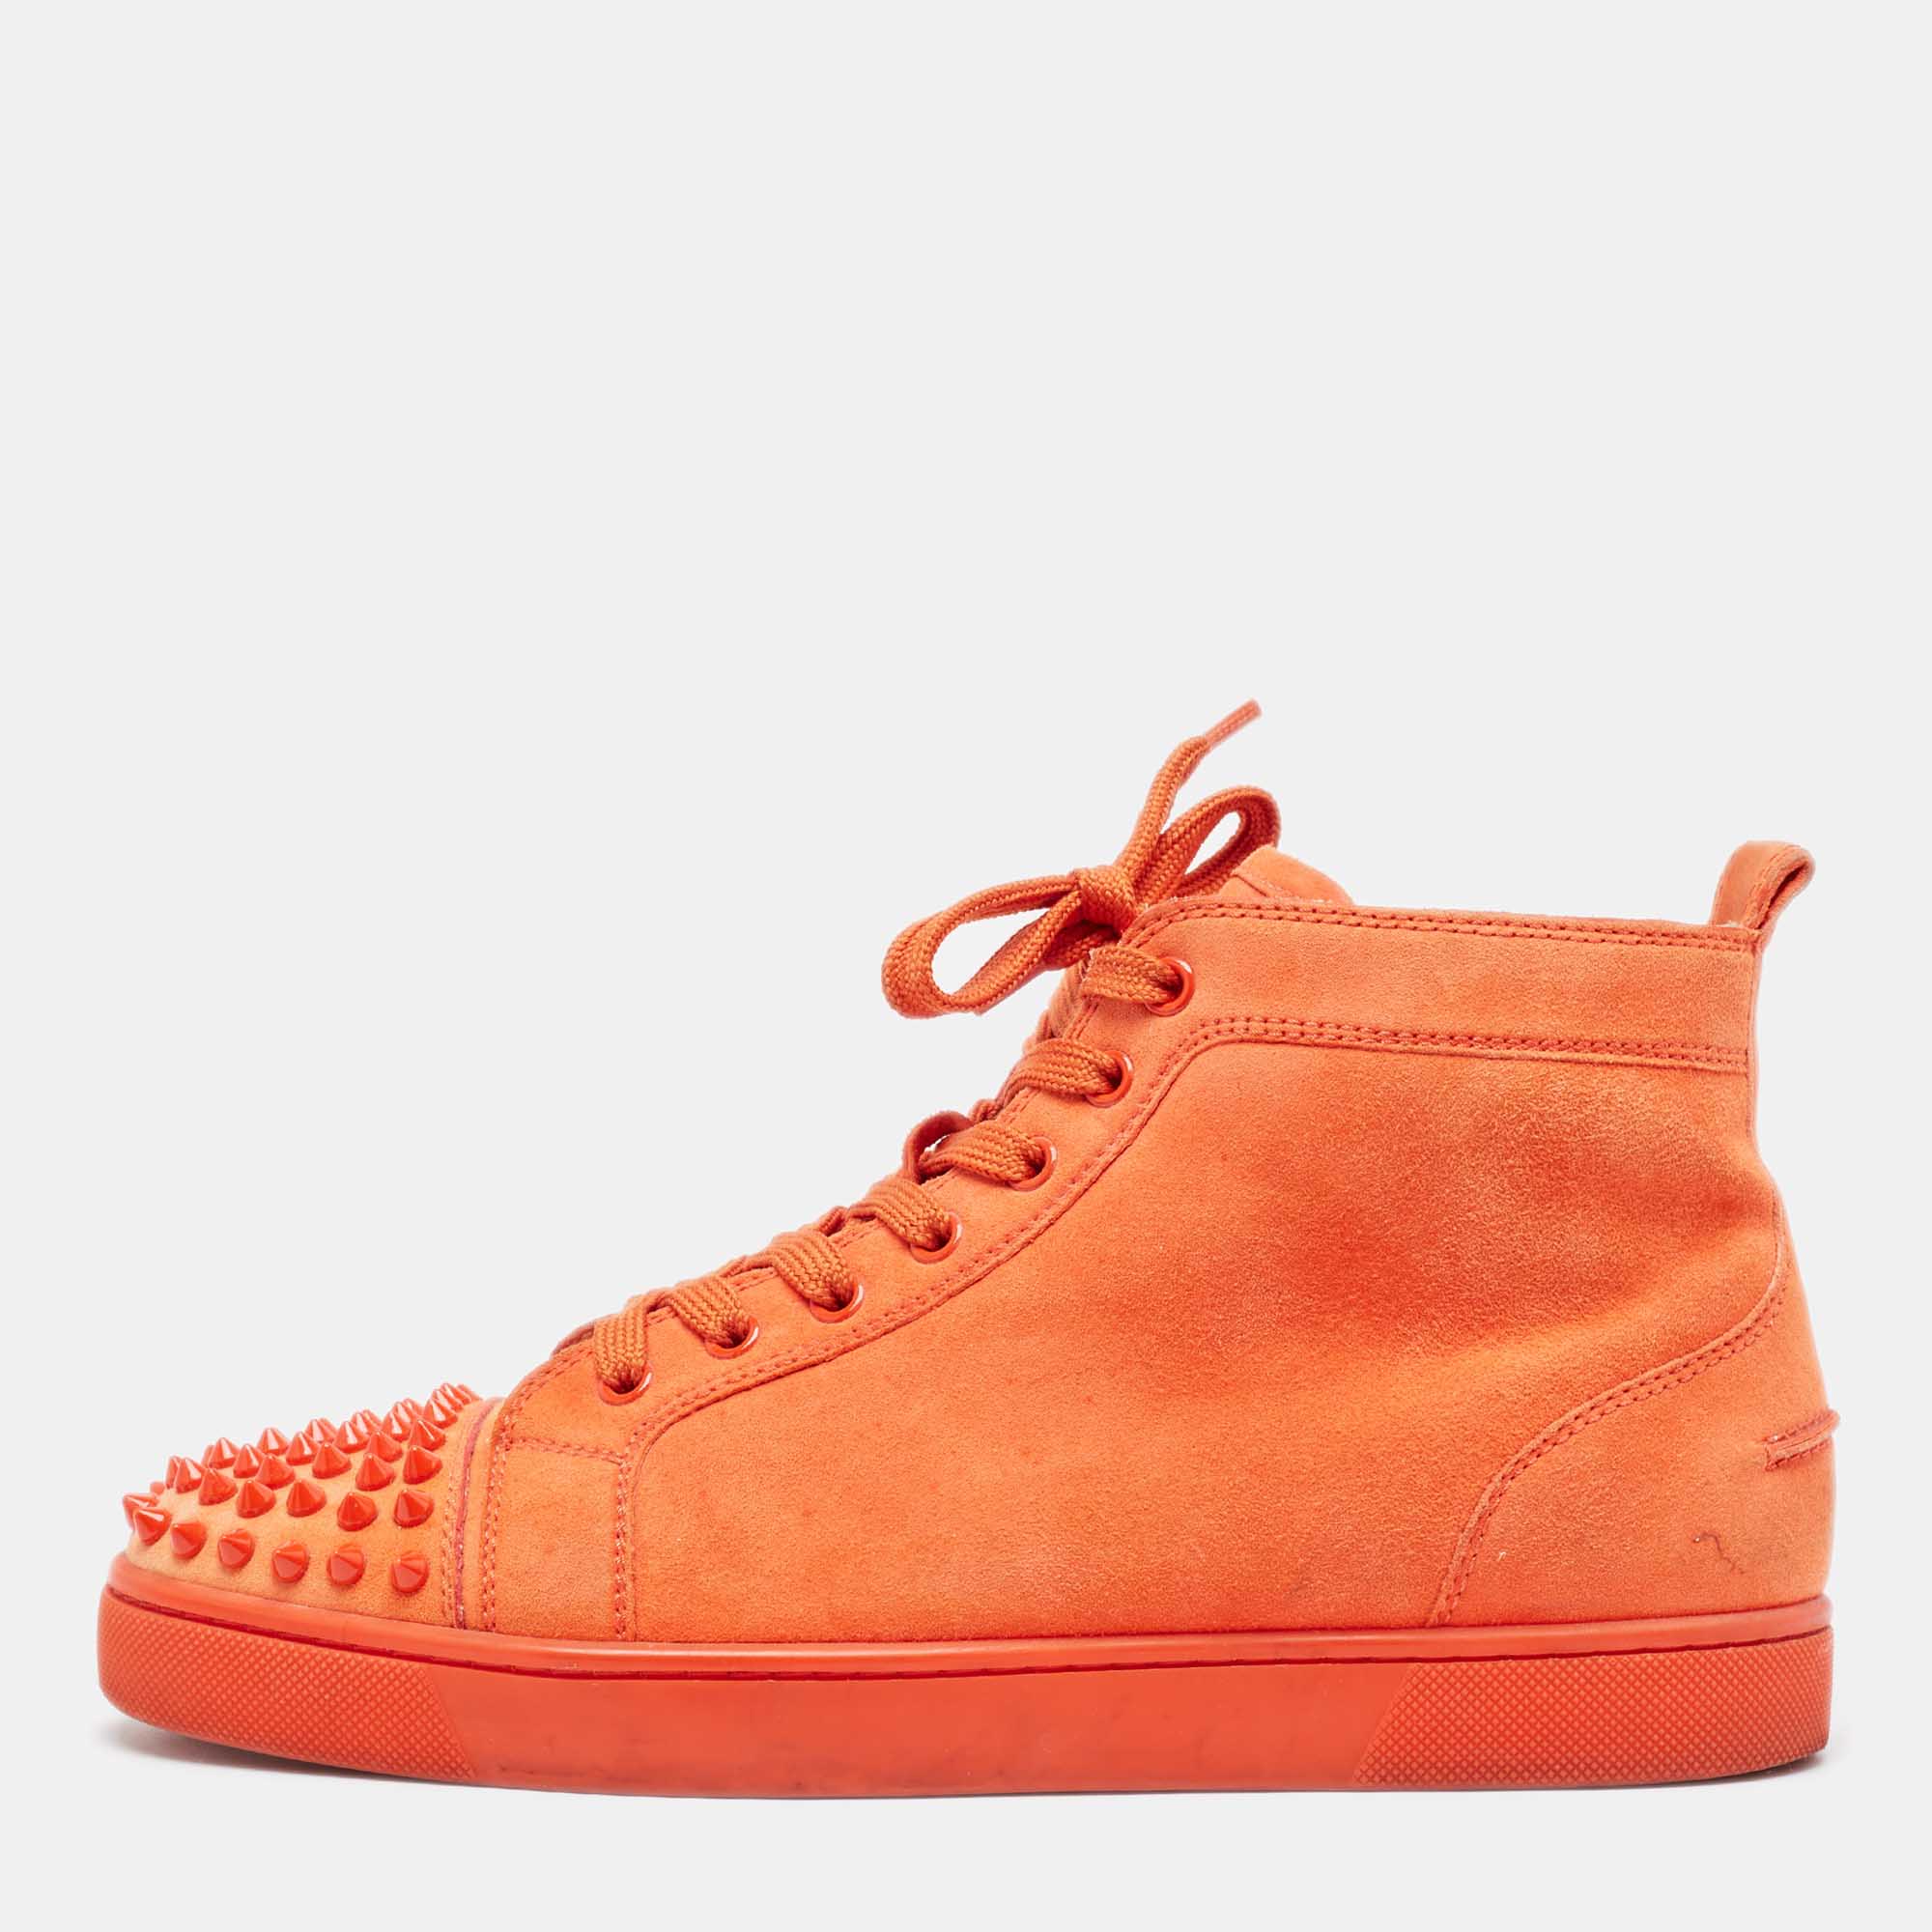 Pre-owned Christian Louboutin Orange Suede Lou Spikes Sneakers Size 41